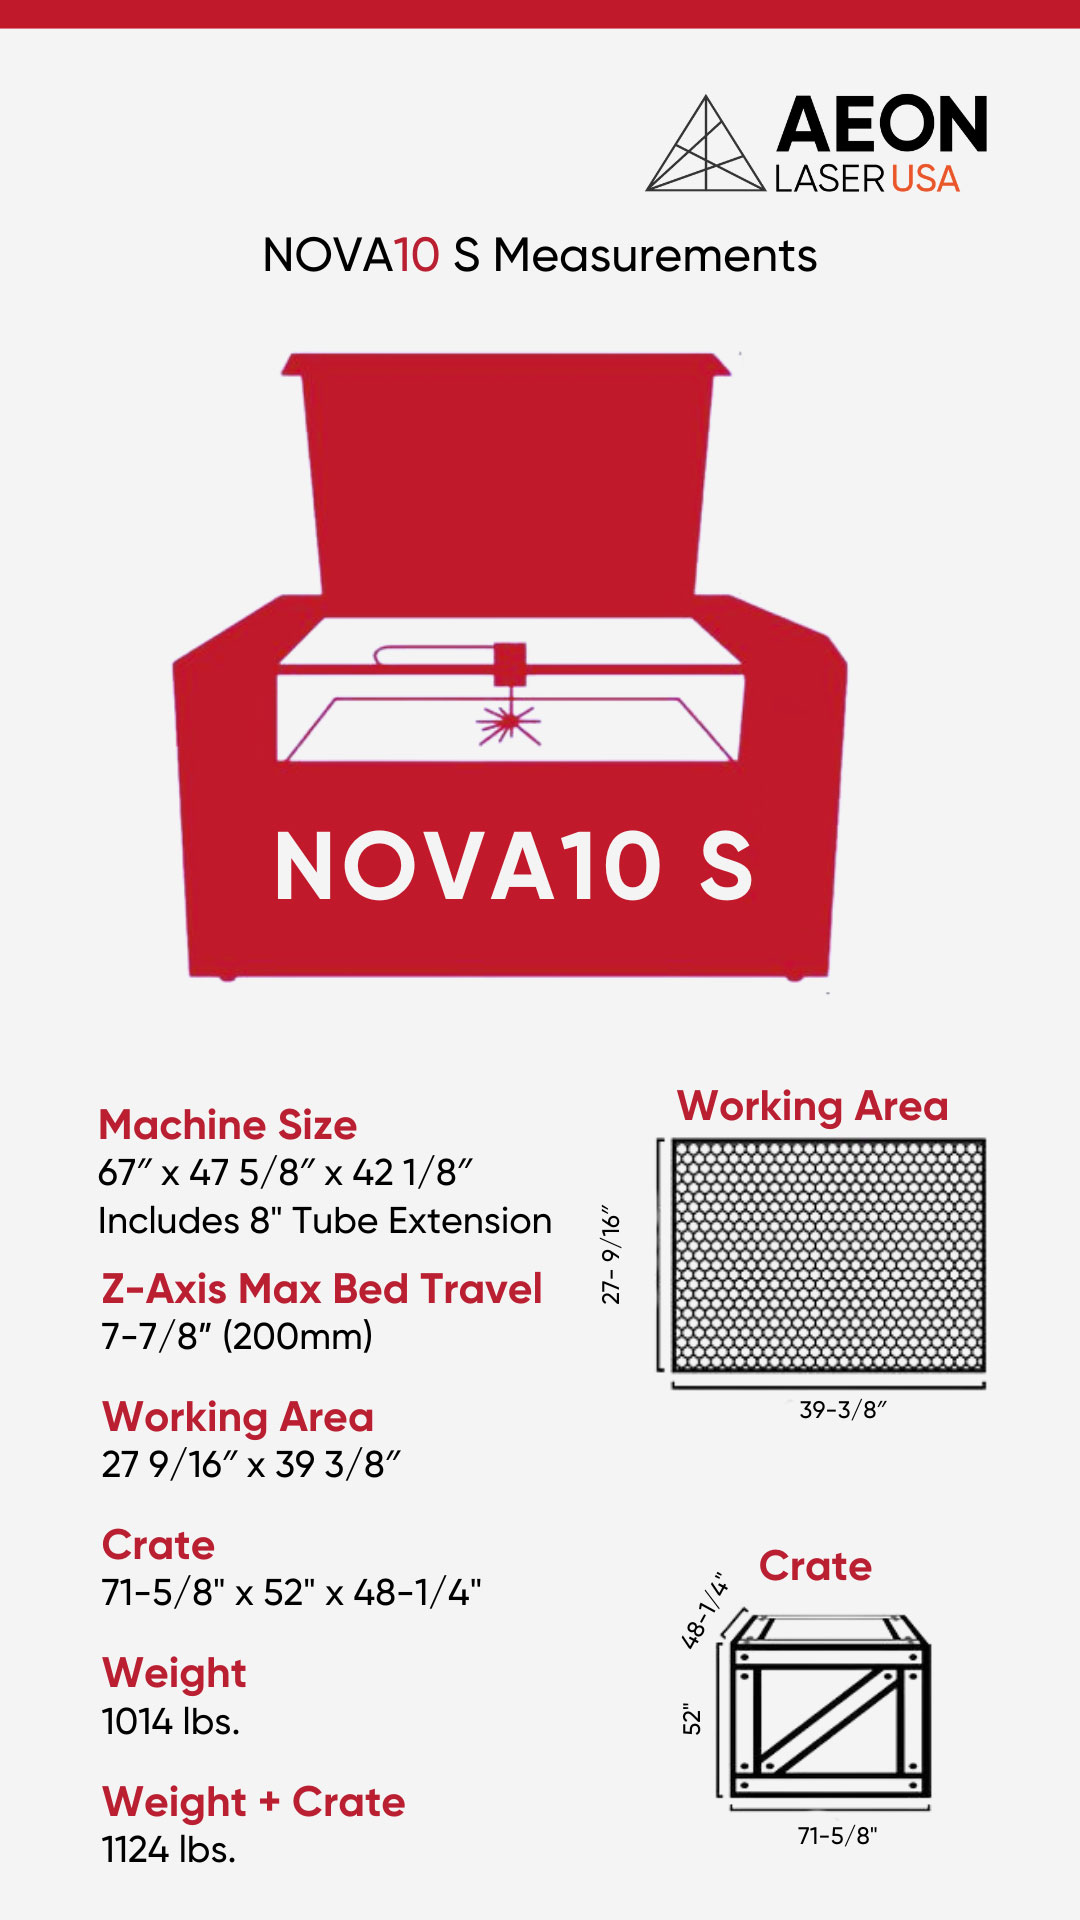 Graphic showing the dimensions of the NOVA 10 S laser, crate size, and weight info